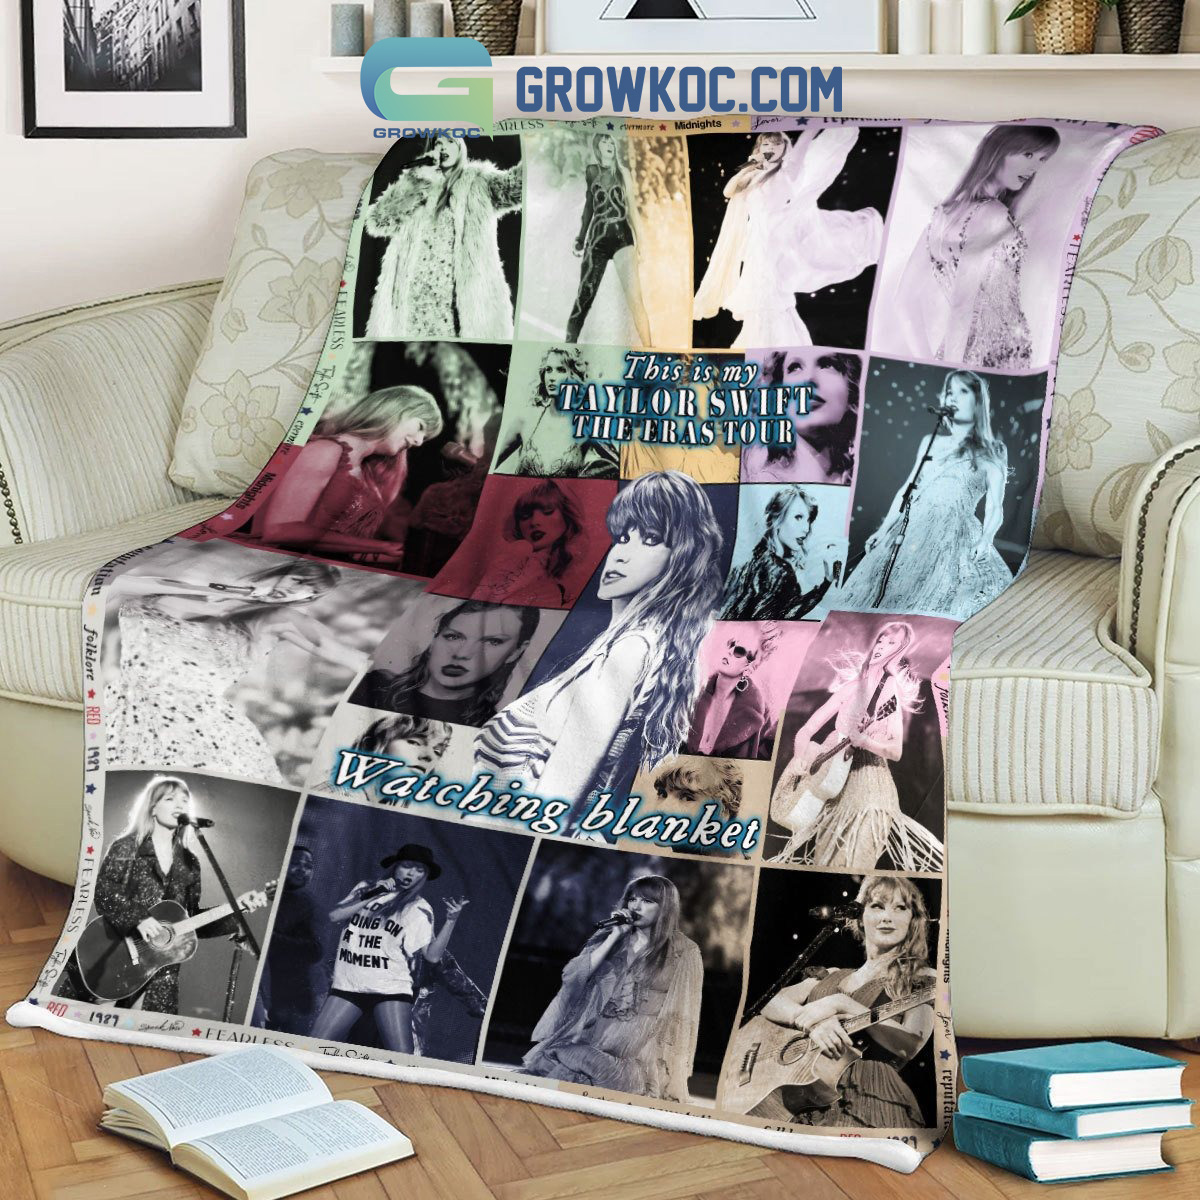 Taylors Album Covers Eras Tour Gift For Fan Blanket - Trends Bedding